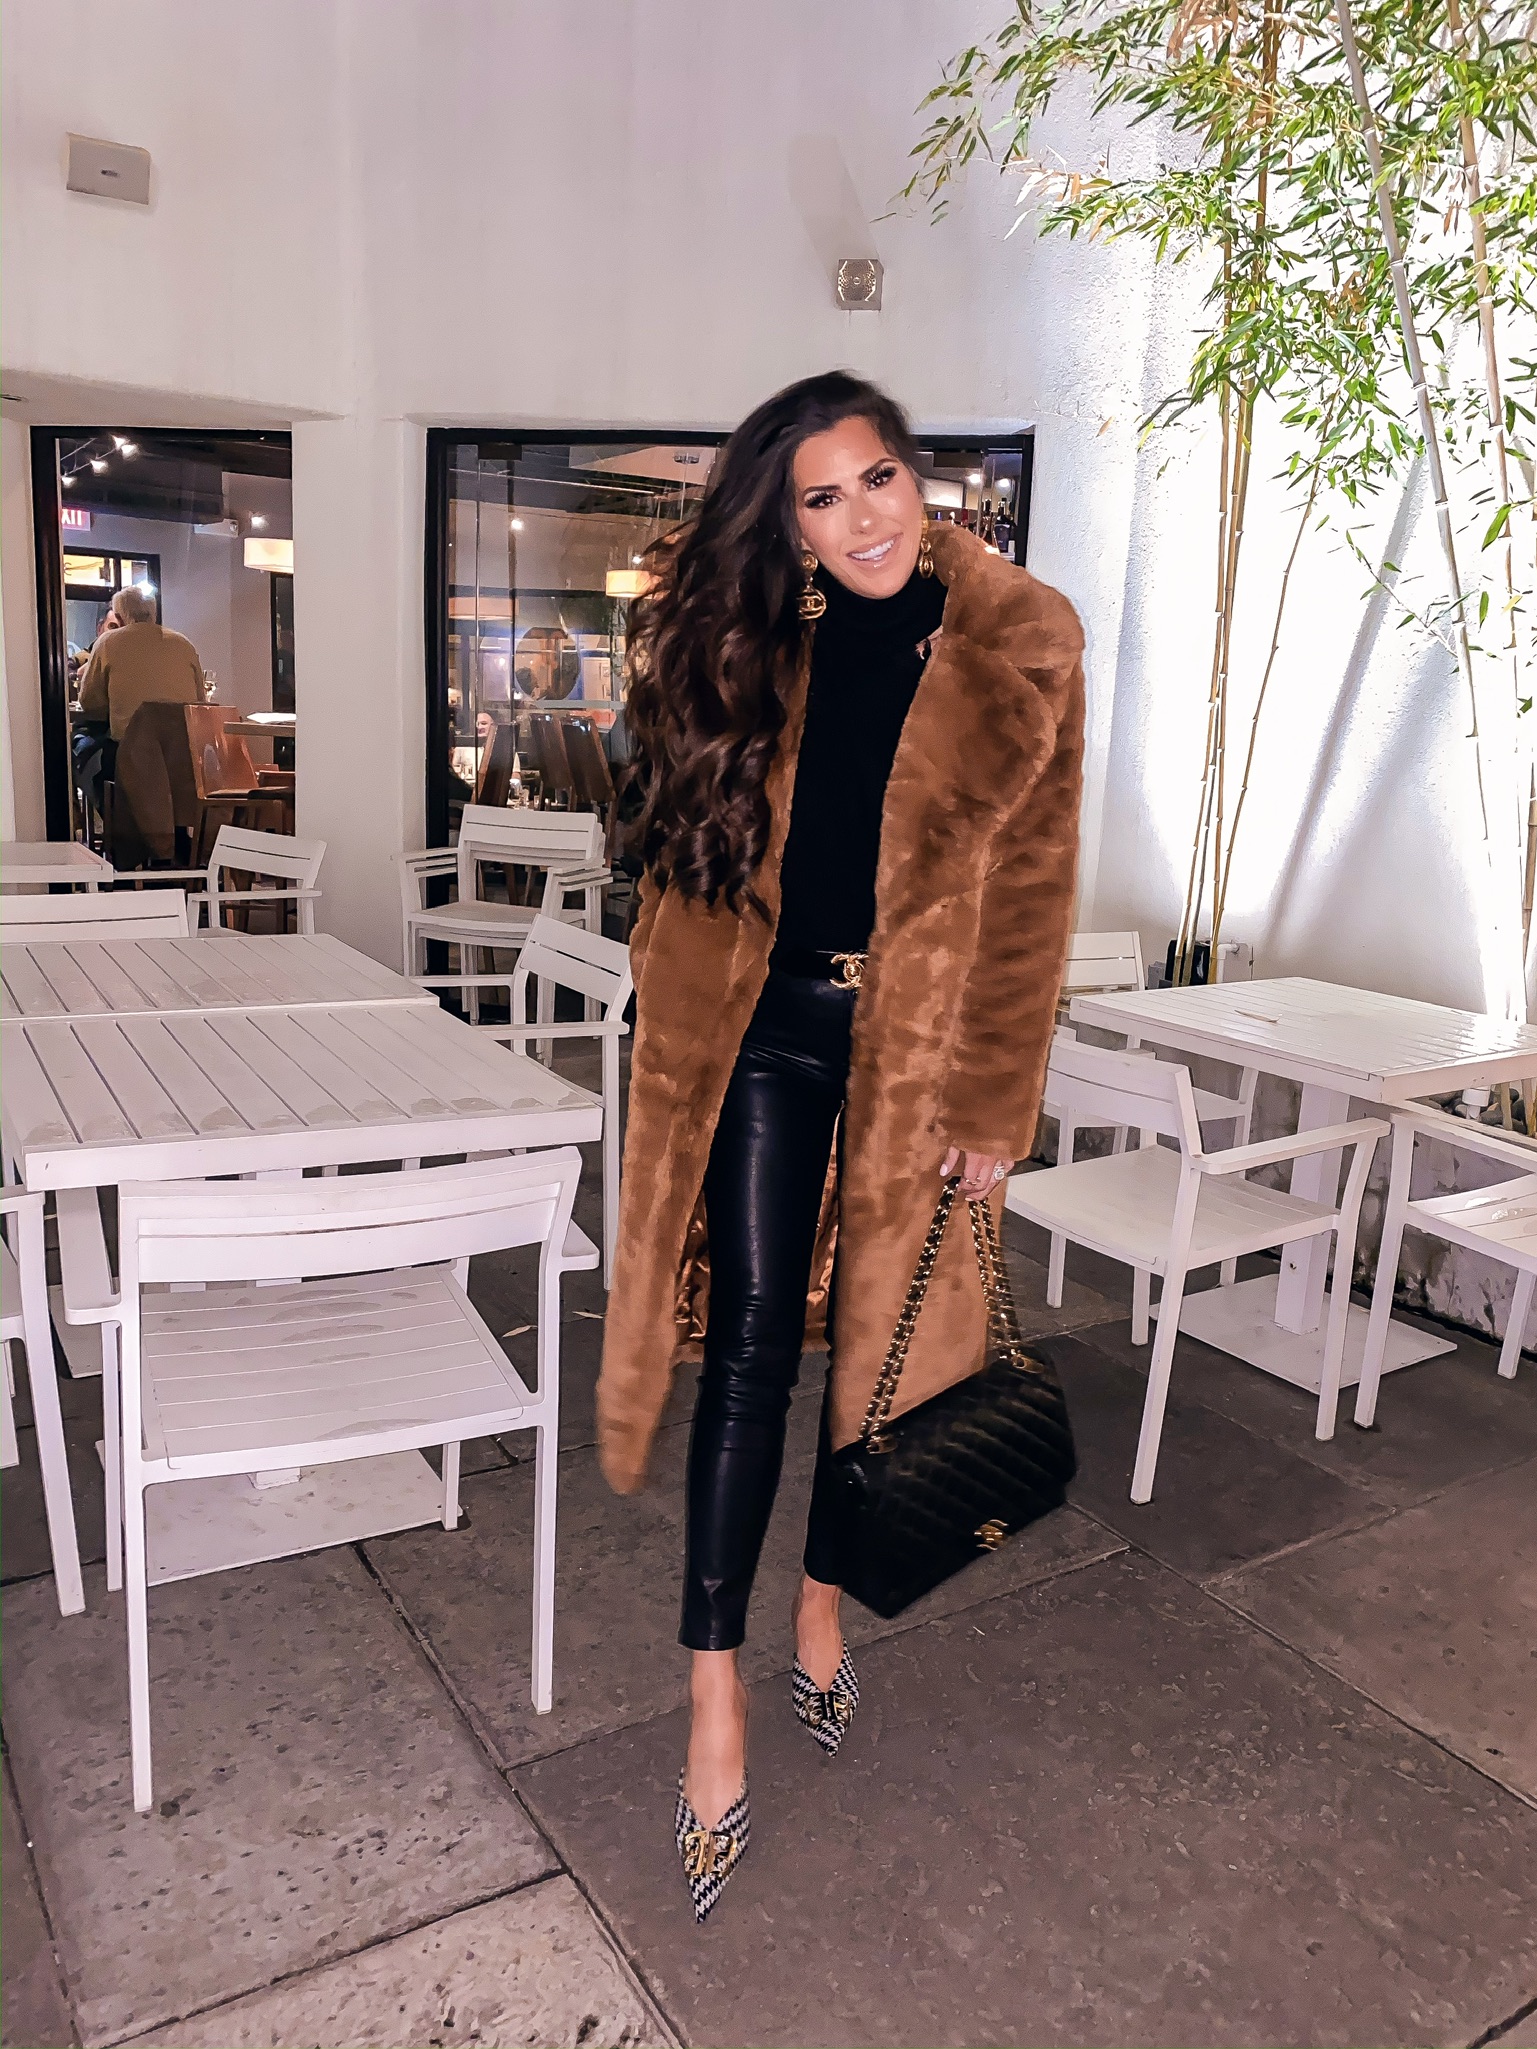 Instagram Recap by popular US fashion blog, The Sweetest Thing: image of a woman wearing a Chanel belt, Nordstrom High Waist Coated Skinny Jeans 1822 DENIM, Revolve Arlington Sweater Lovers + Friends brand:Lovers + Friends, Nordstrom Longline Faux Fur Coat NA-KD, and holding a Chanel Maxi purse. 